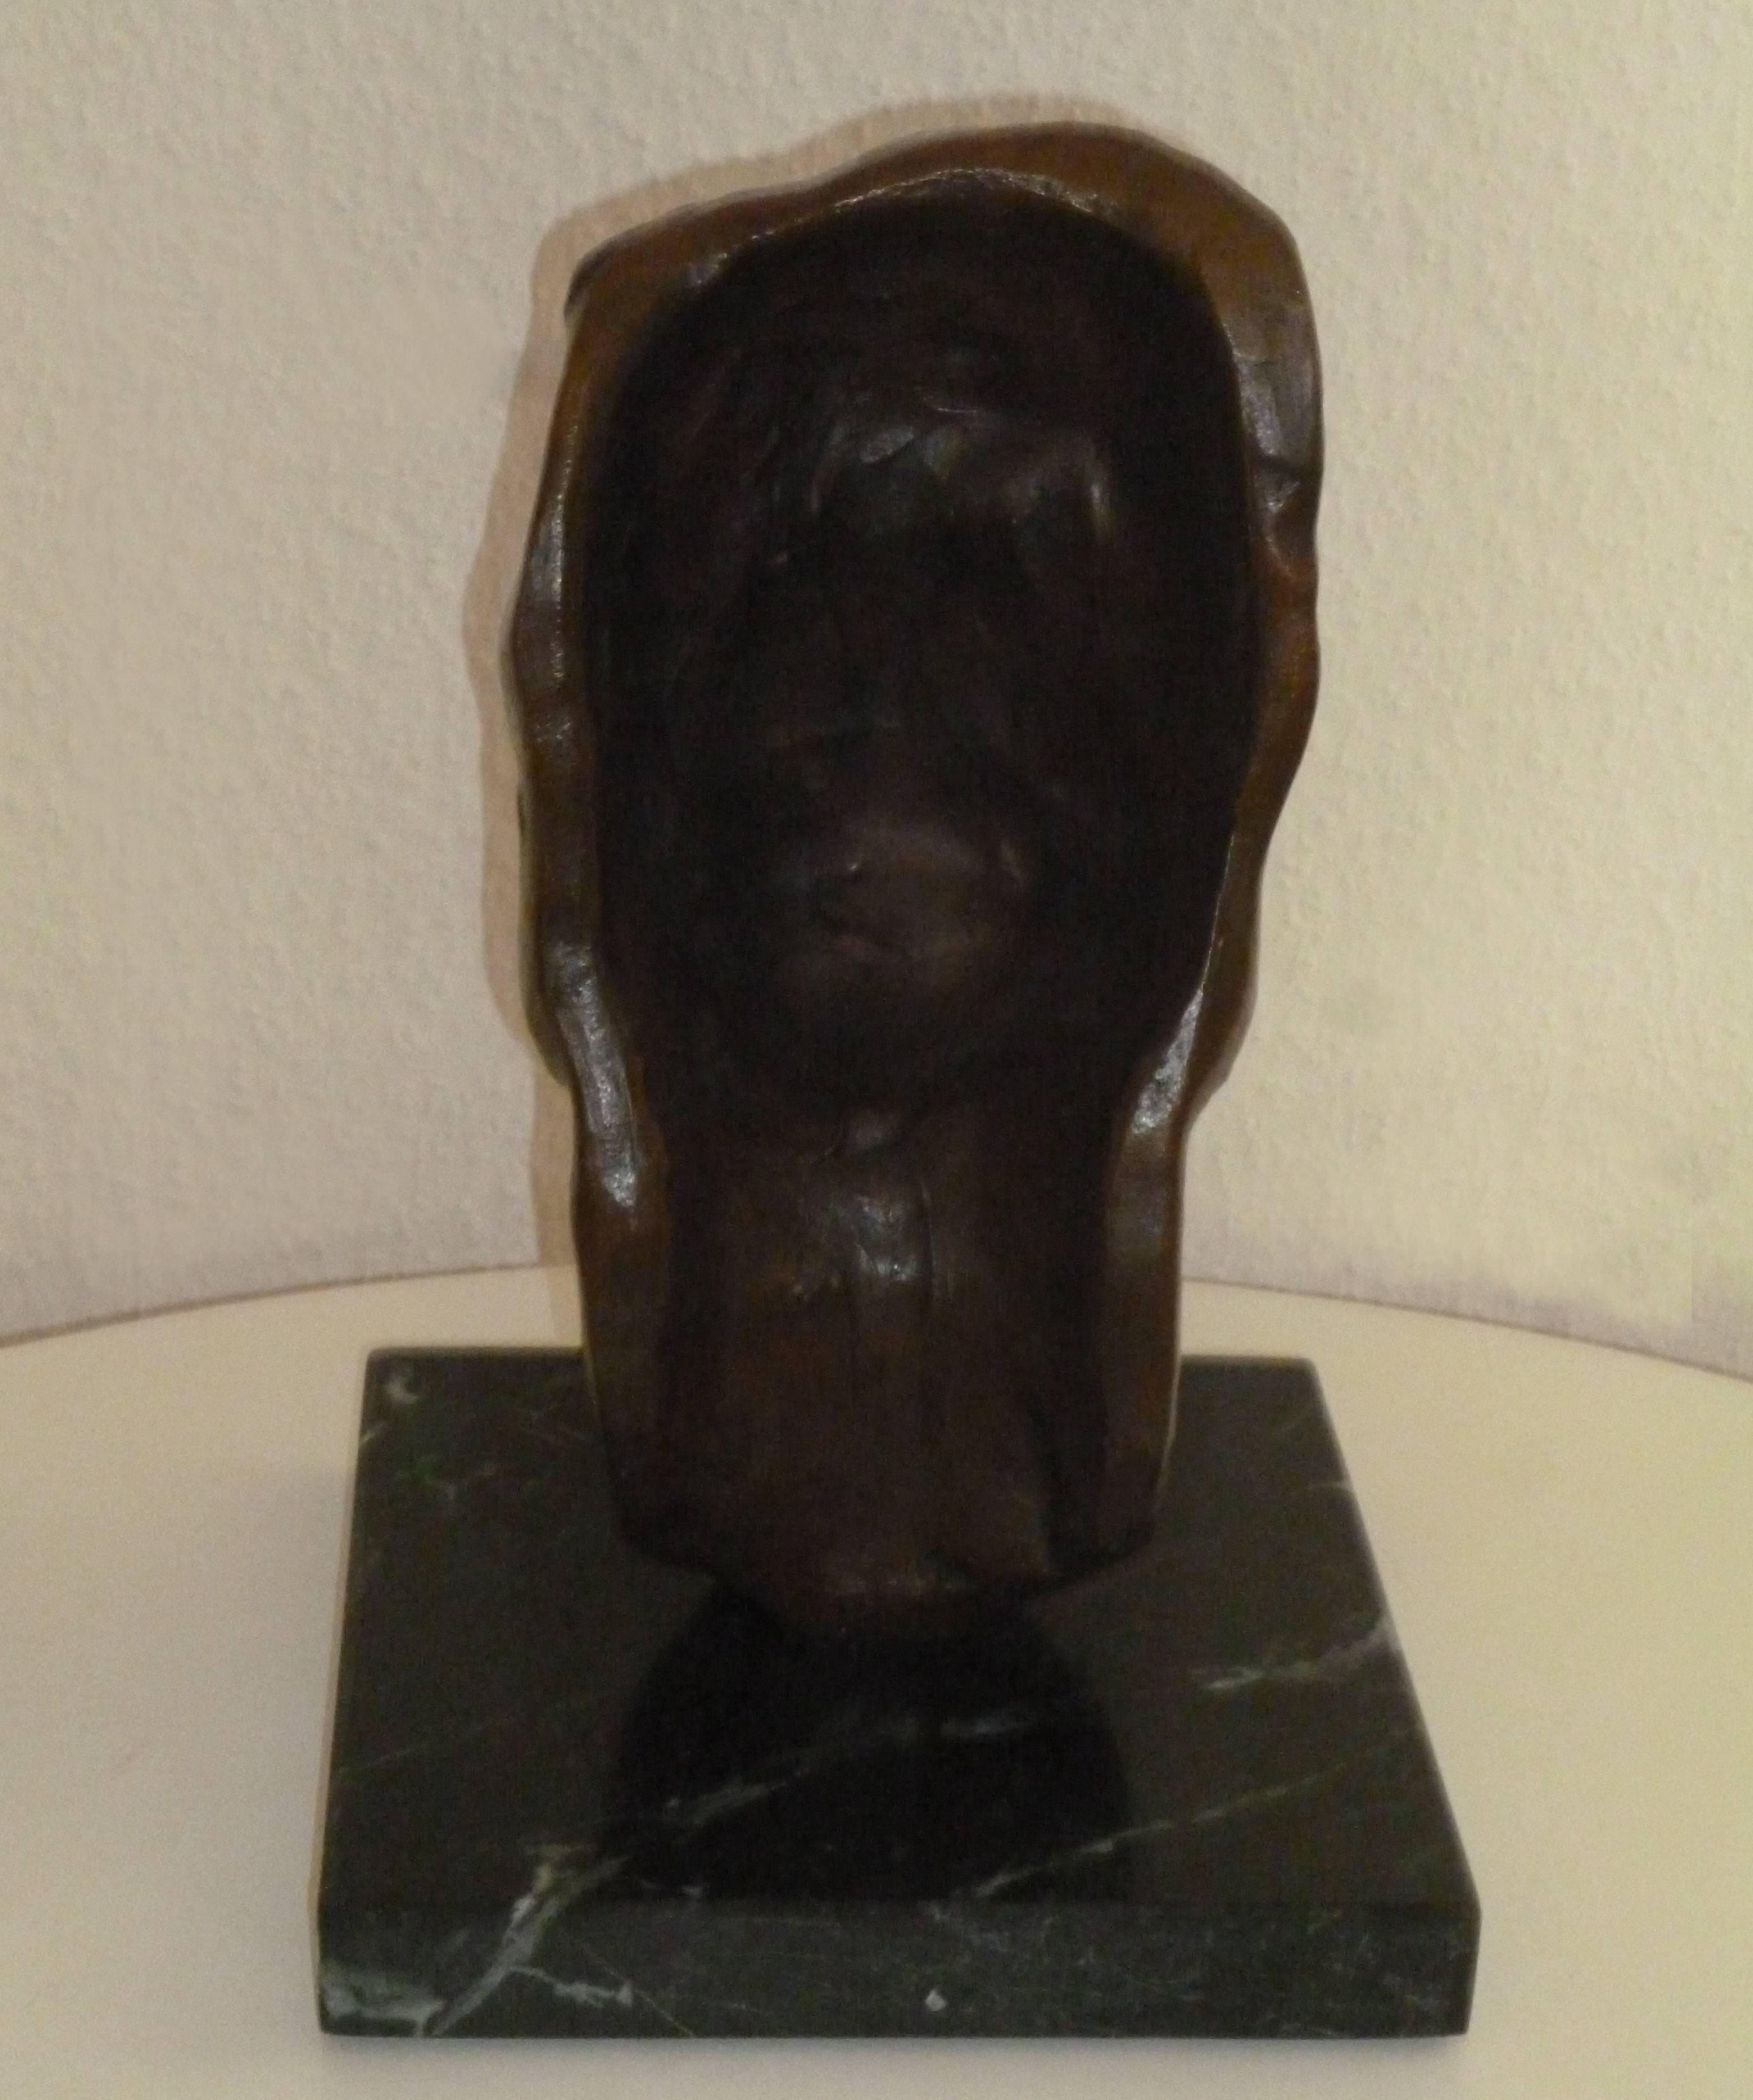 Bronze, brown patinated, 1923 by Renèe Sintenis ( 1888-1965 ), Germany.
On square marble base. Casted 1944-1945. Monogramed down on the back: R.S. Number 3 from edition of 5 pieces.
Height: 12.2 in ( 31 cm ), Width: 7.87 in ( 20 cm ), Depth: 7.87